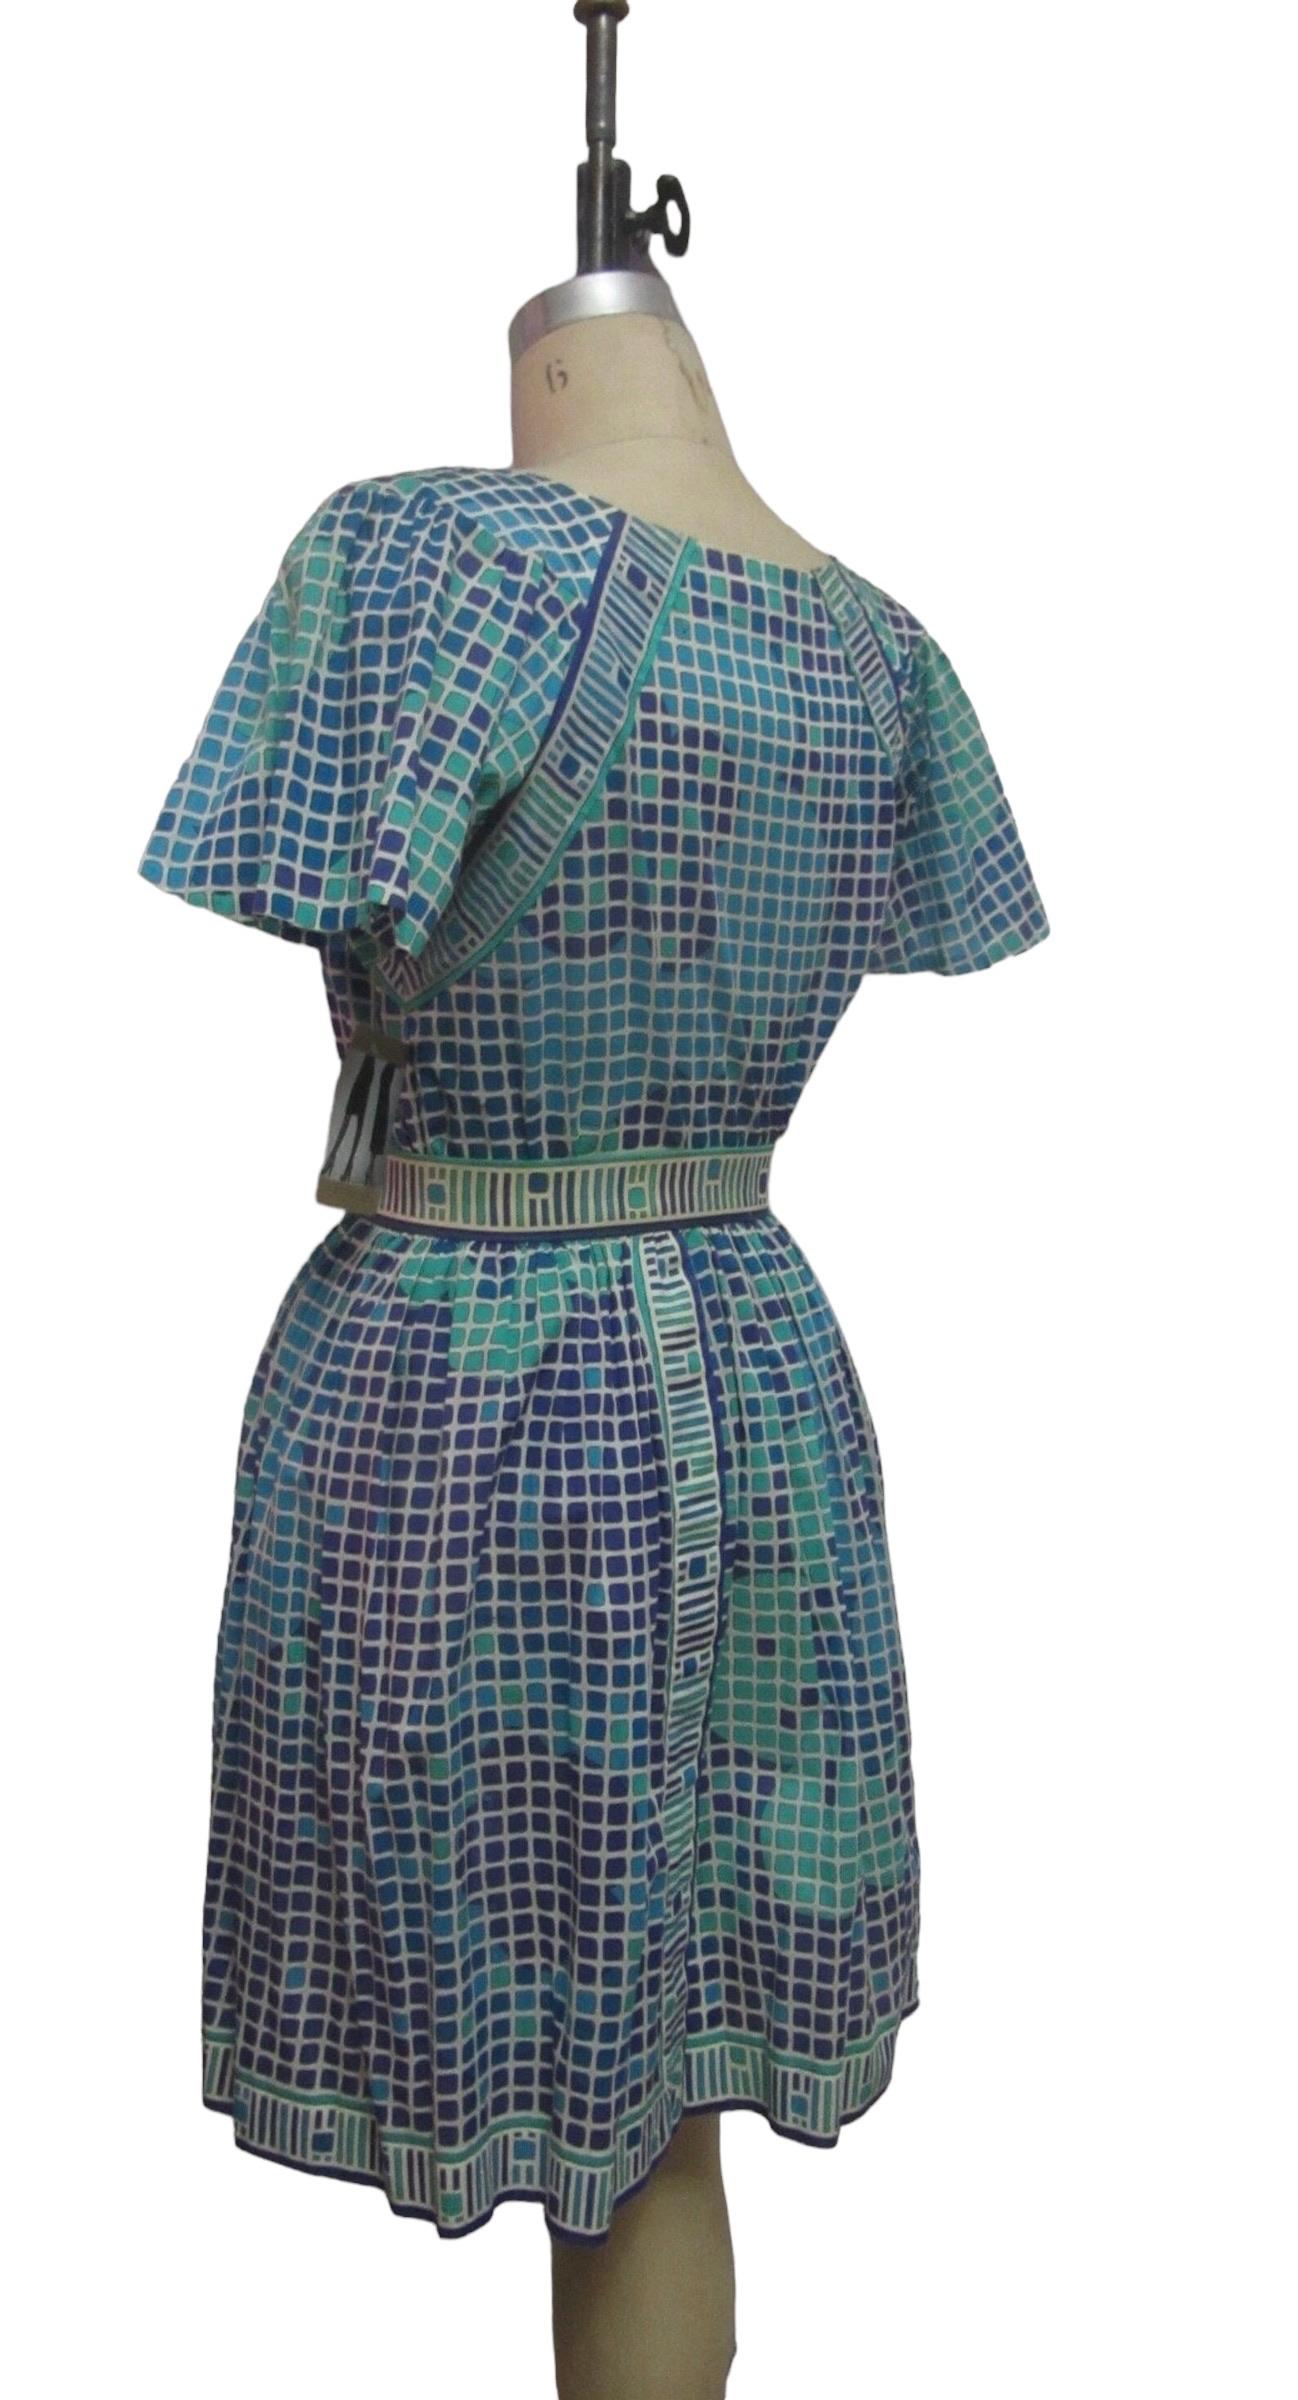 Women's Emilio Pucci Cotton Geometric Print Top and Skirt Set, Circa 1960s For Sale